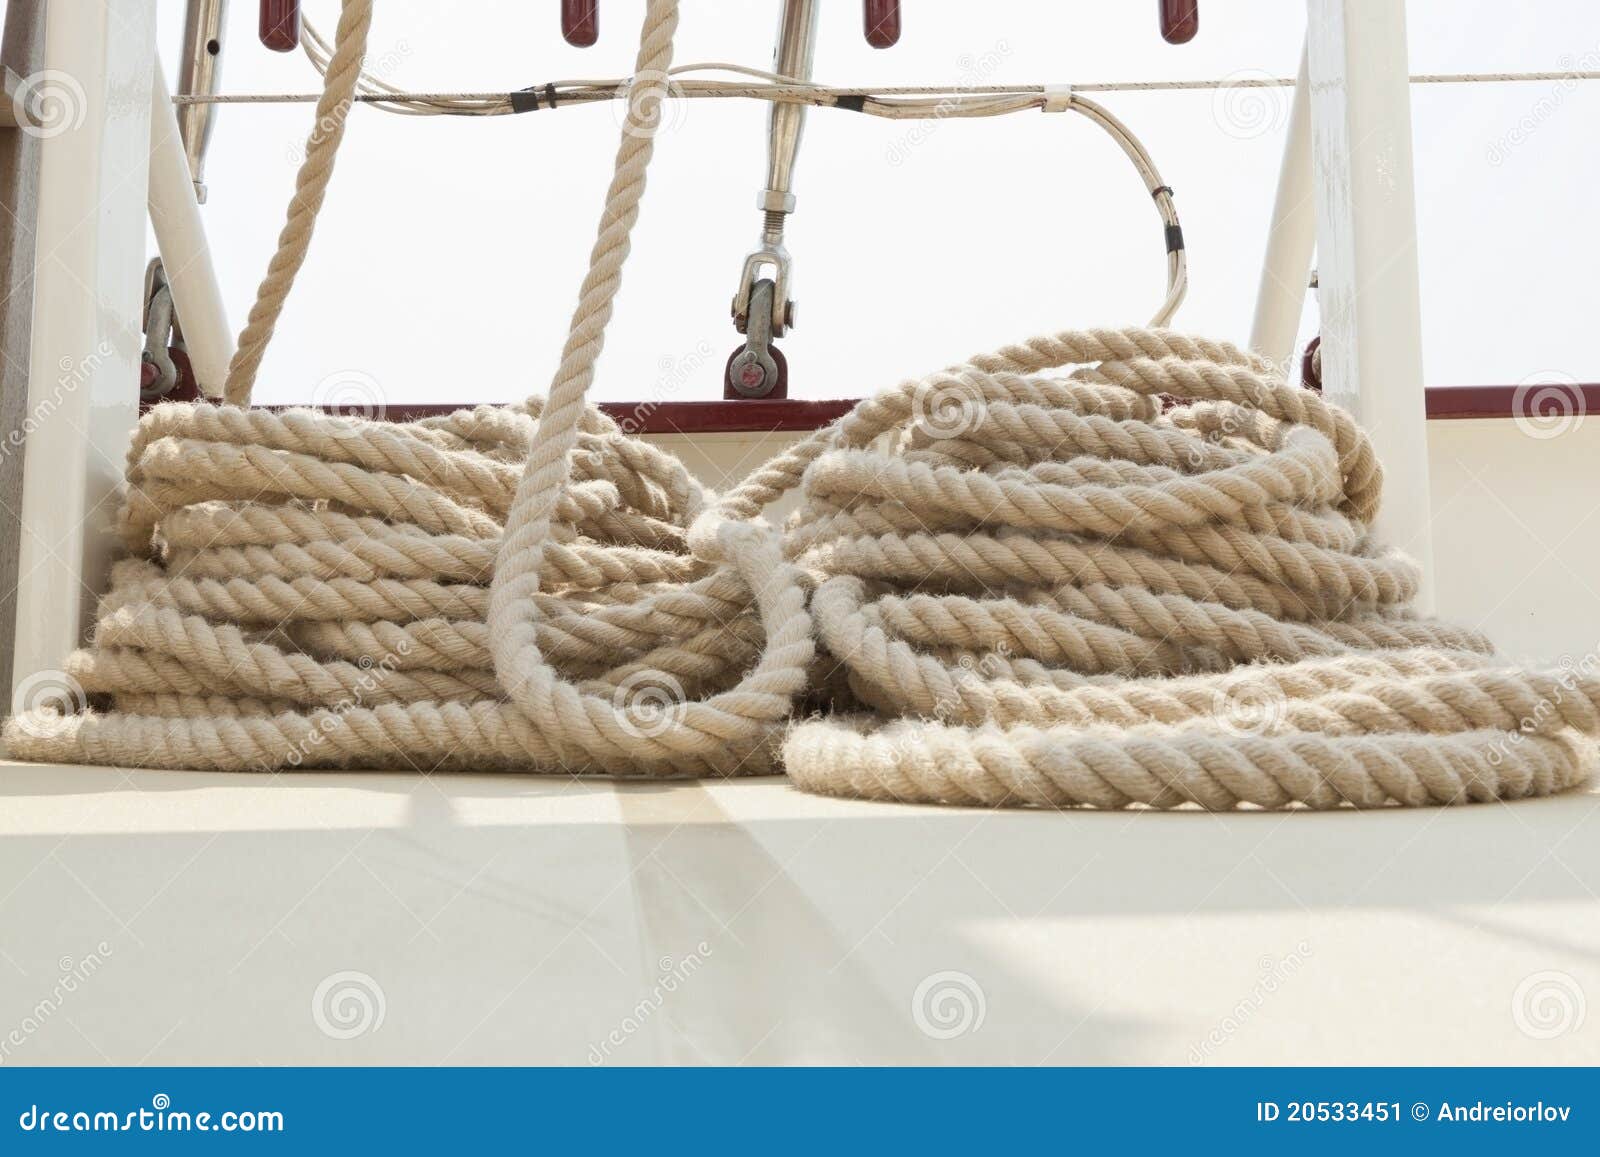 Rope Rigging On A Sailboat Deck. Stock Image - Image: 20533451